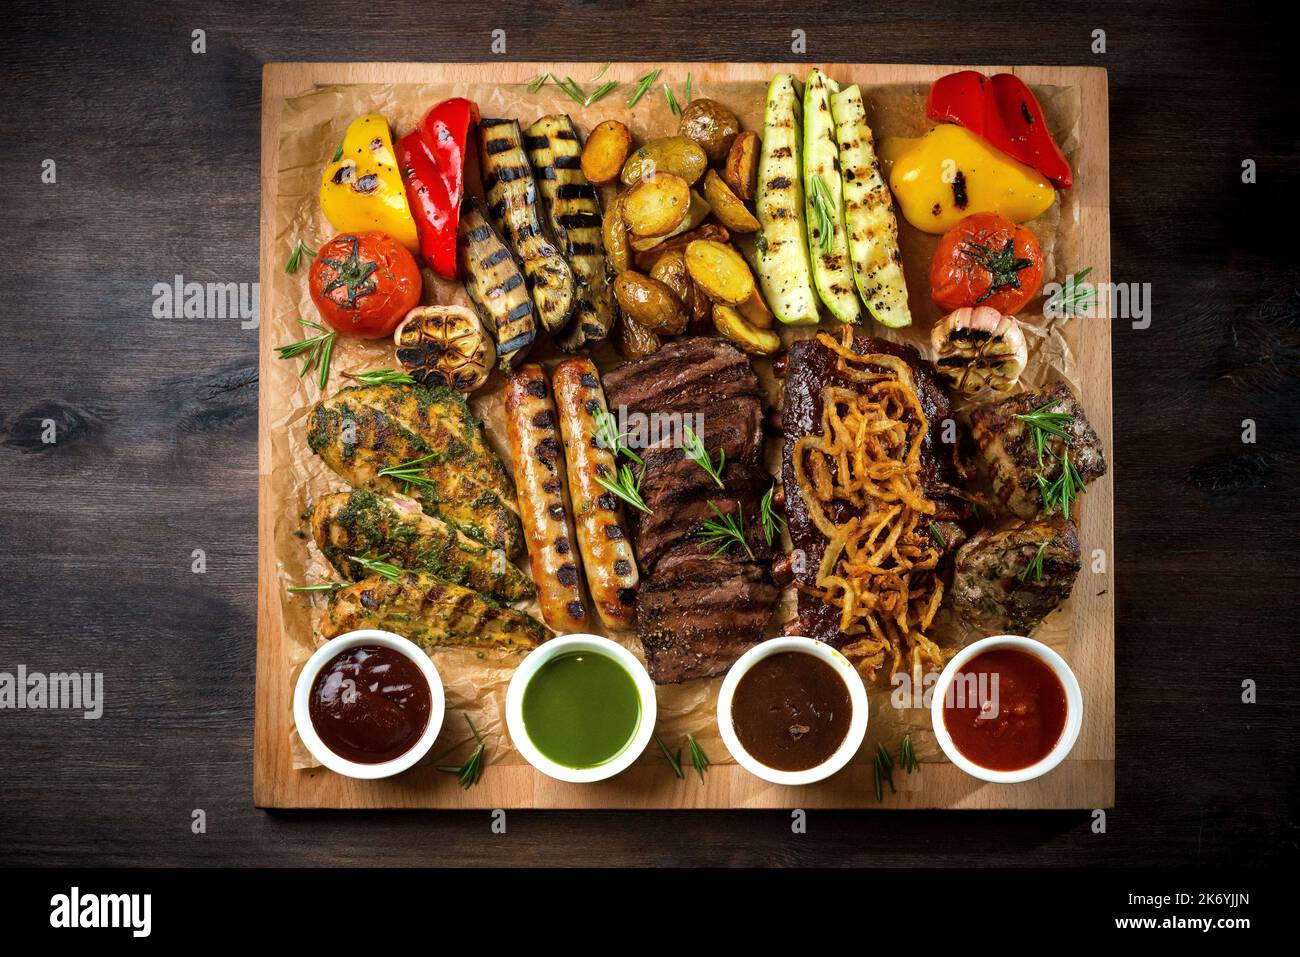 A board with grilled appetizers and sauces. Grilled vegetables and meat snacks: sausages, chicken fillets, pork and beef steaks. Stock Photo